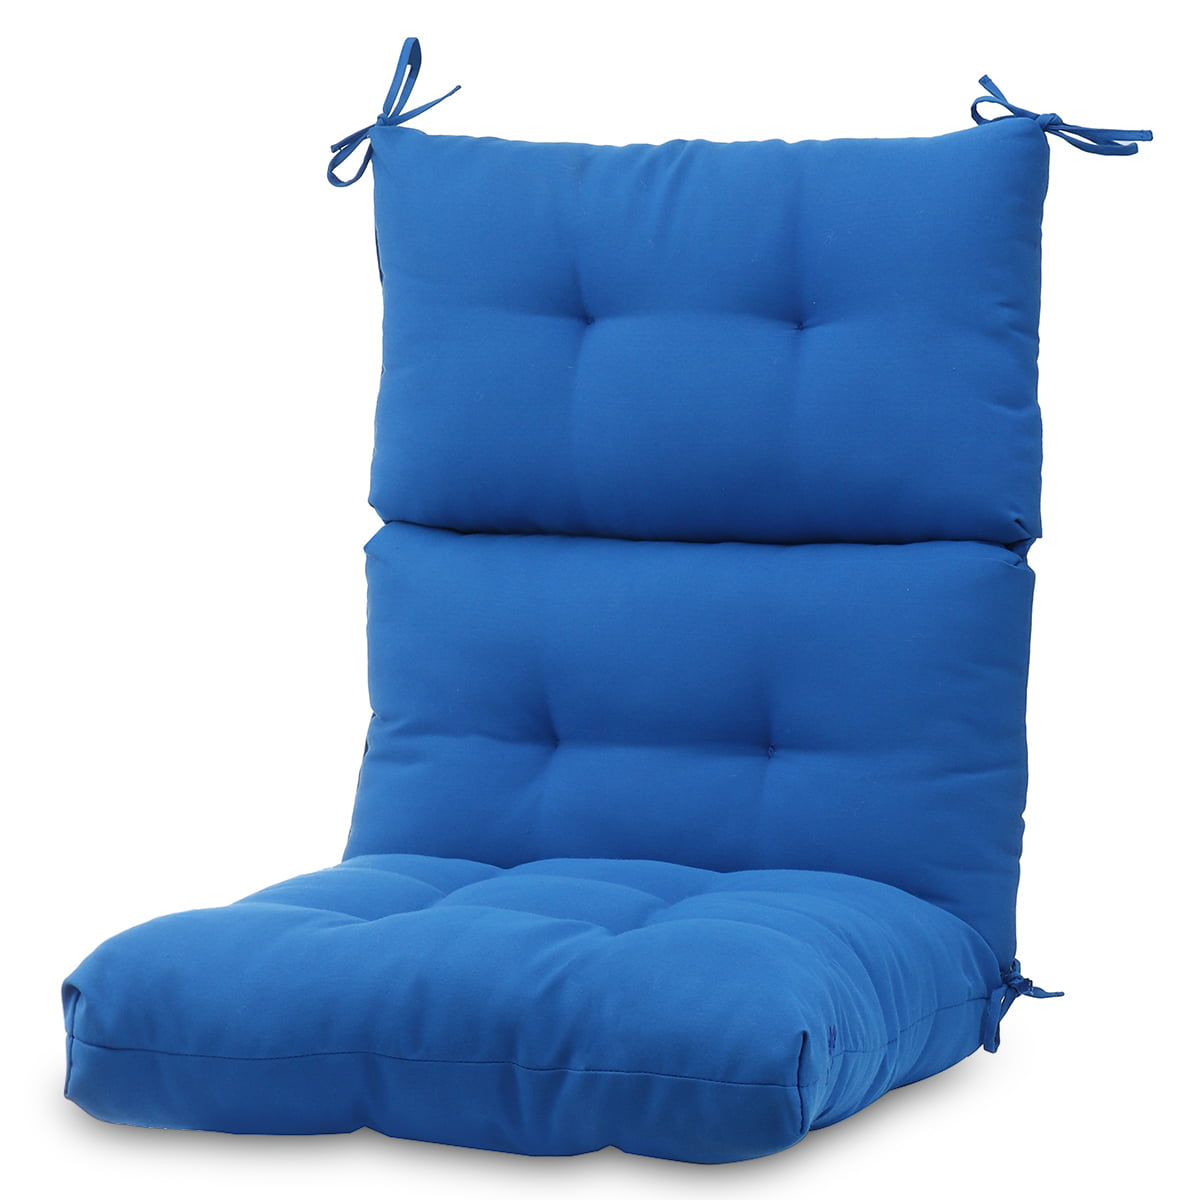 Details about   High Back Chair Cushion Seat Mat Pad Rebound Foam Water Resistant Indoor Outdoor 